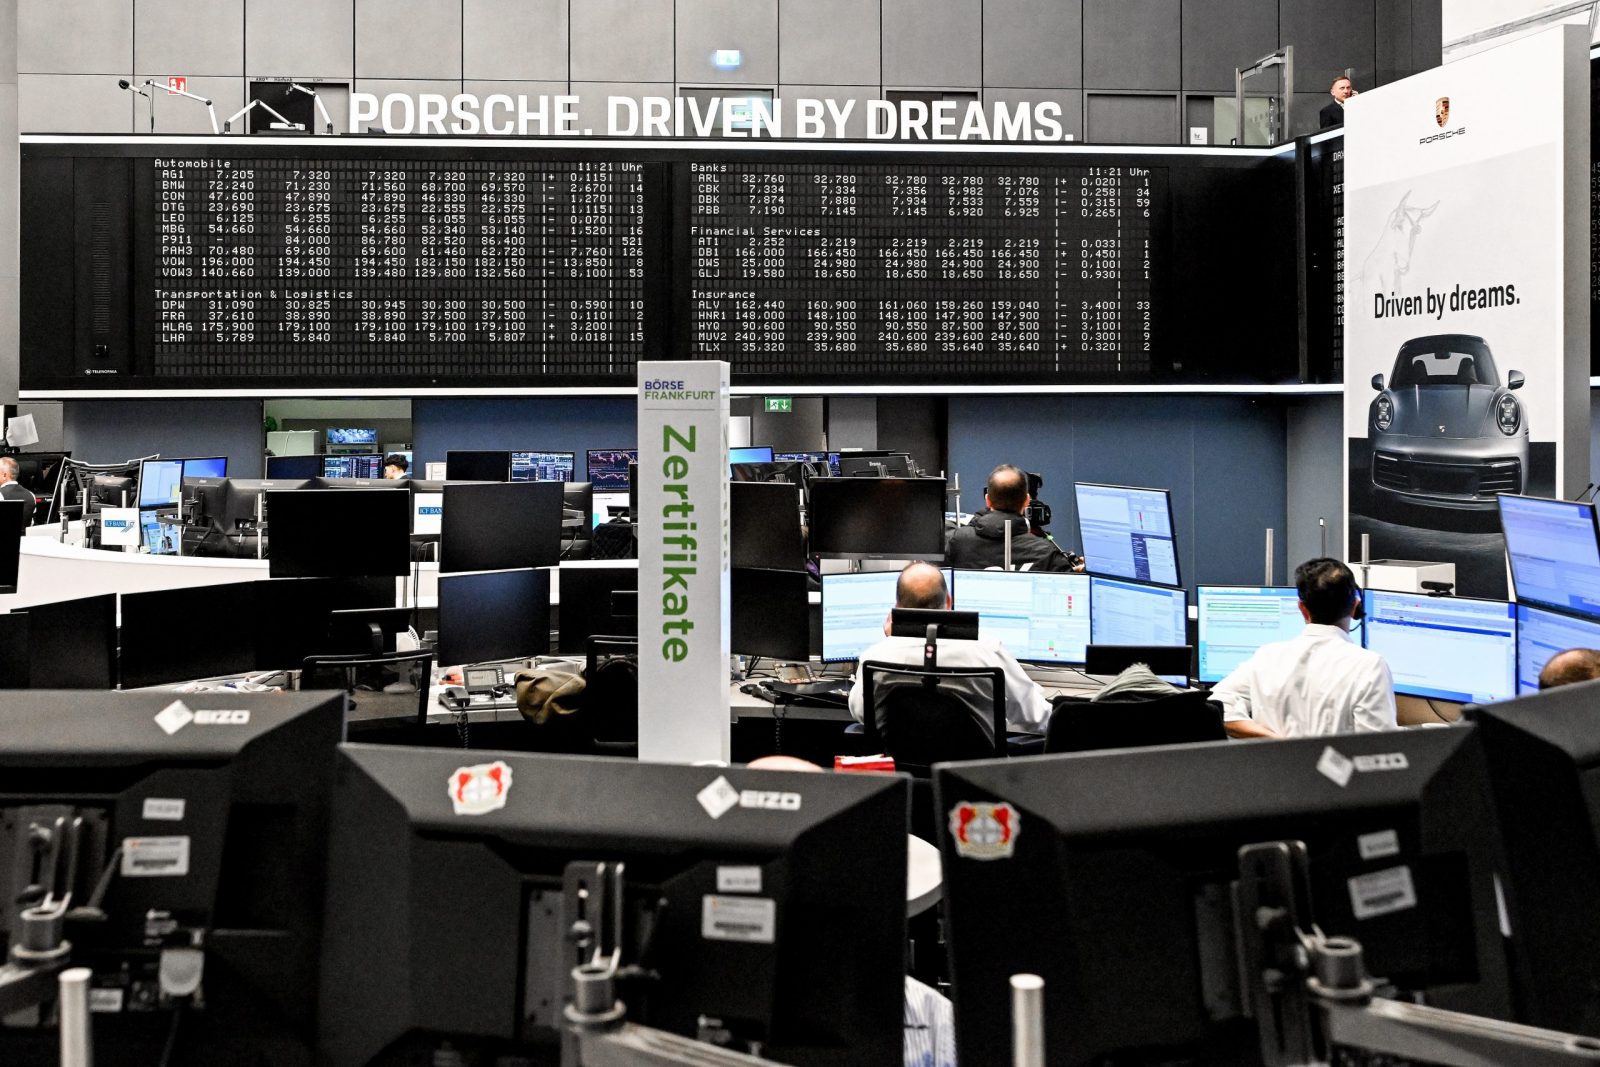 epa10213204 A trader watch monitors during the initial public offering (IPO) of German car manufacturer Porsche at the Frankfurt Stock Exchange in Frankfurt am Main, Germany, 29 September 2022. With the largest IPO in Germany in 25 years, German automaker Volkswagen has set the placement price for the preferred shares at 82.50 euro in consultation with Porsche AG and the advising banks. This gives Porsche a stock market value of 75 billion euros. Porsche shares will be traded on the Frankfurt Stock Exchange for the first time on 29 September 2022.  EPA/SASCHA STEINBACH